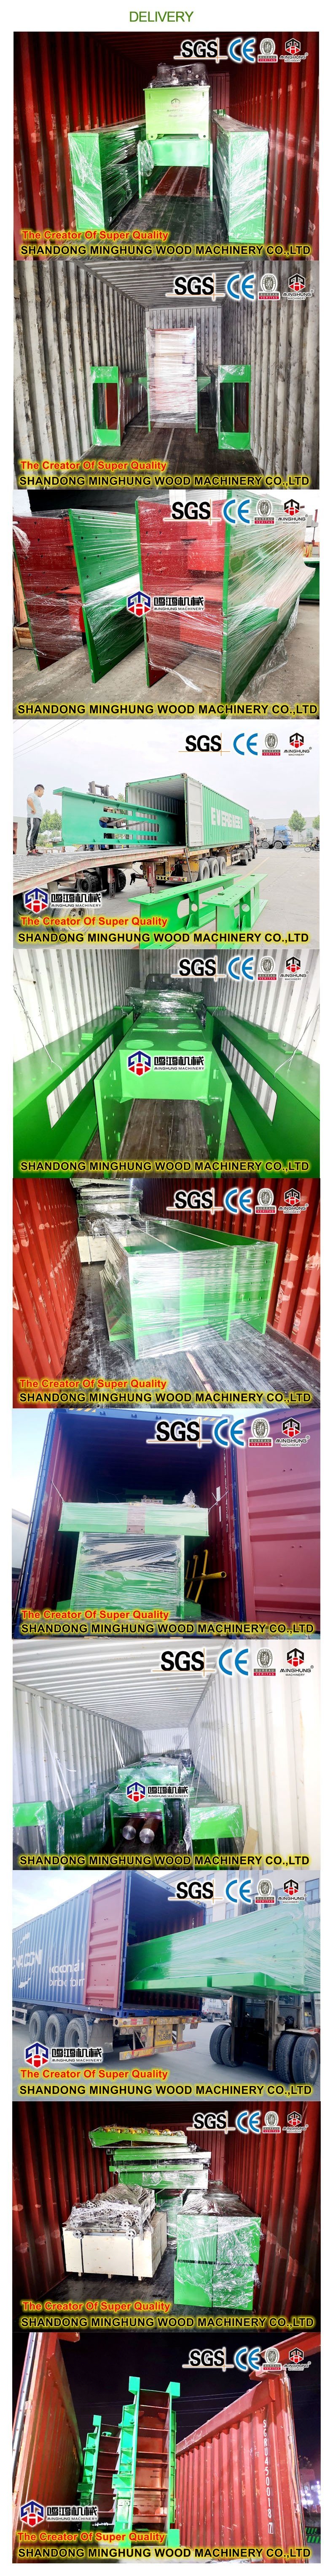 Mesin Cold Press Woodworking 500t Plywood